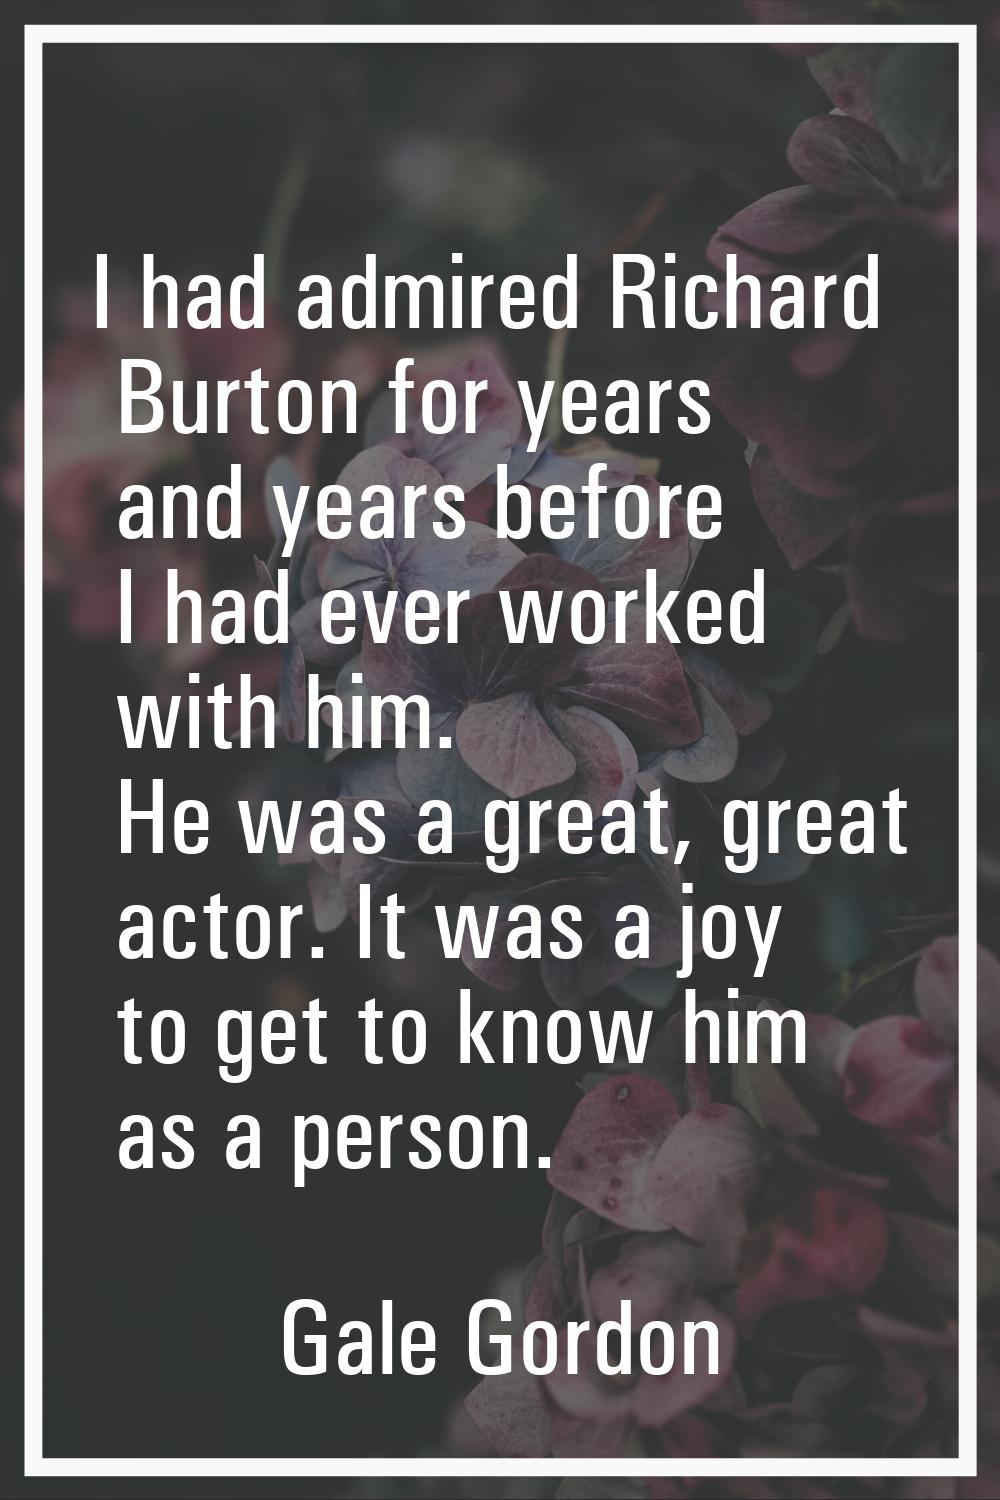 I had admired Richard Burton for years and years before I had ever worked with him. He was a great,